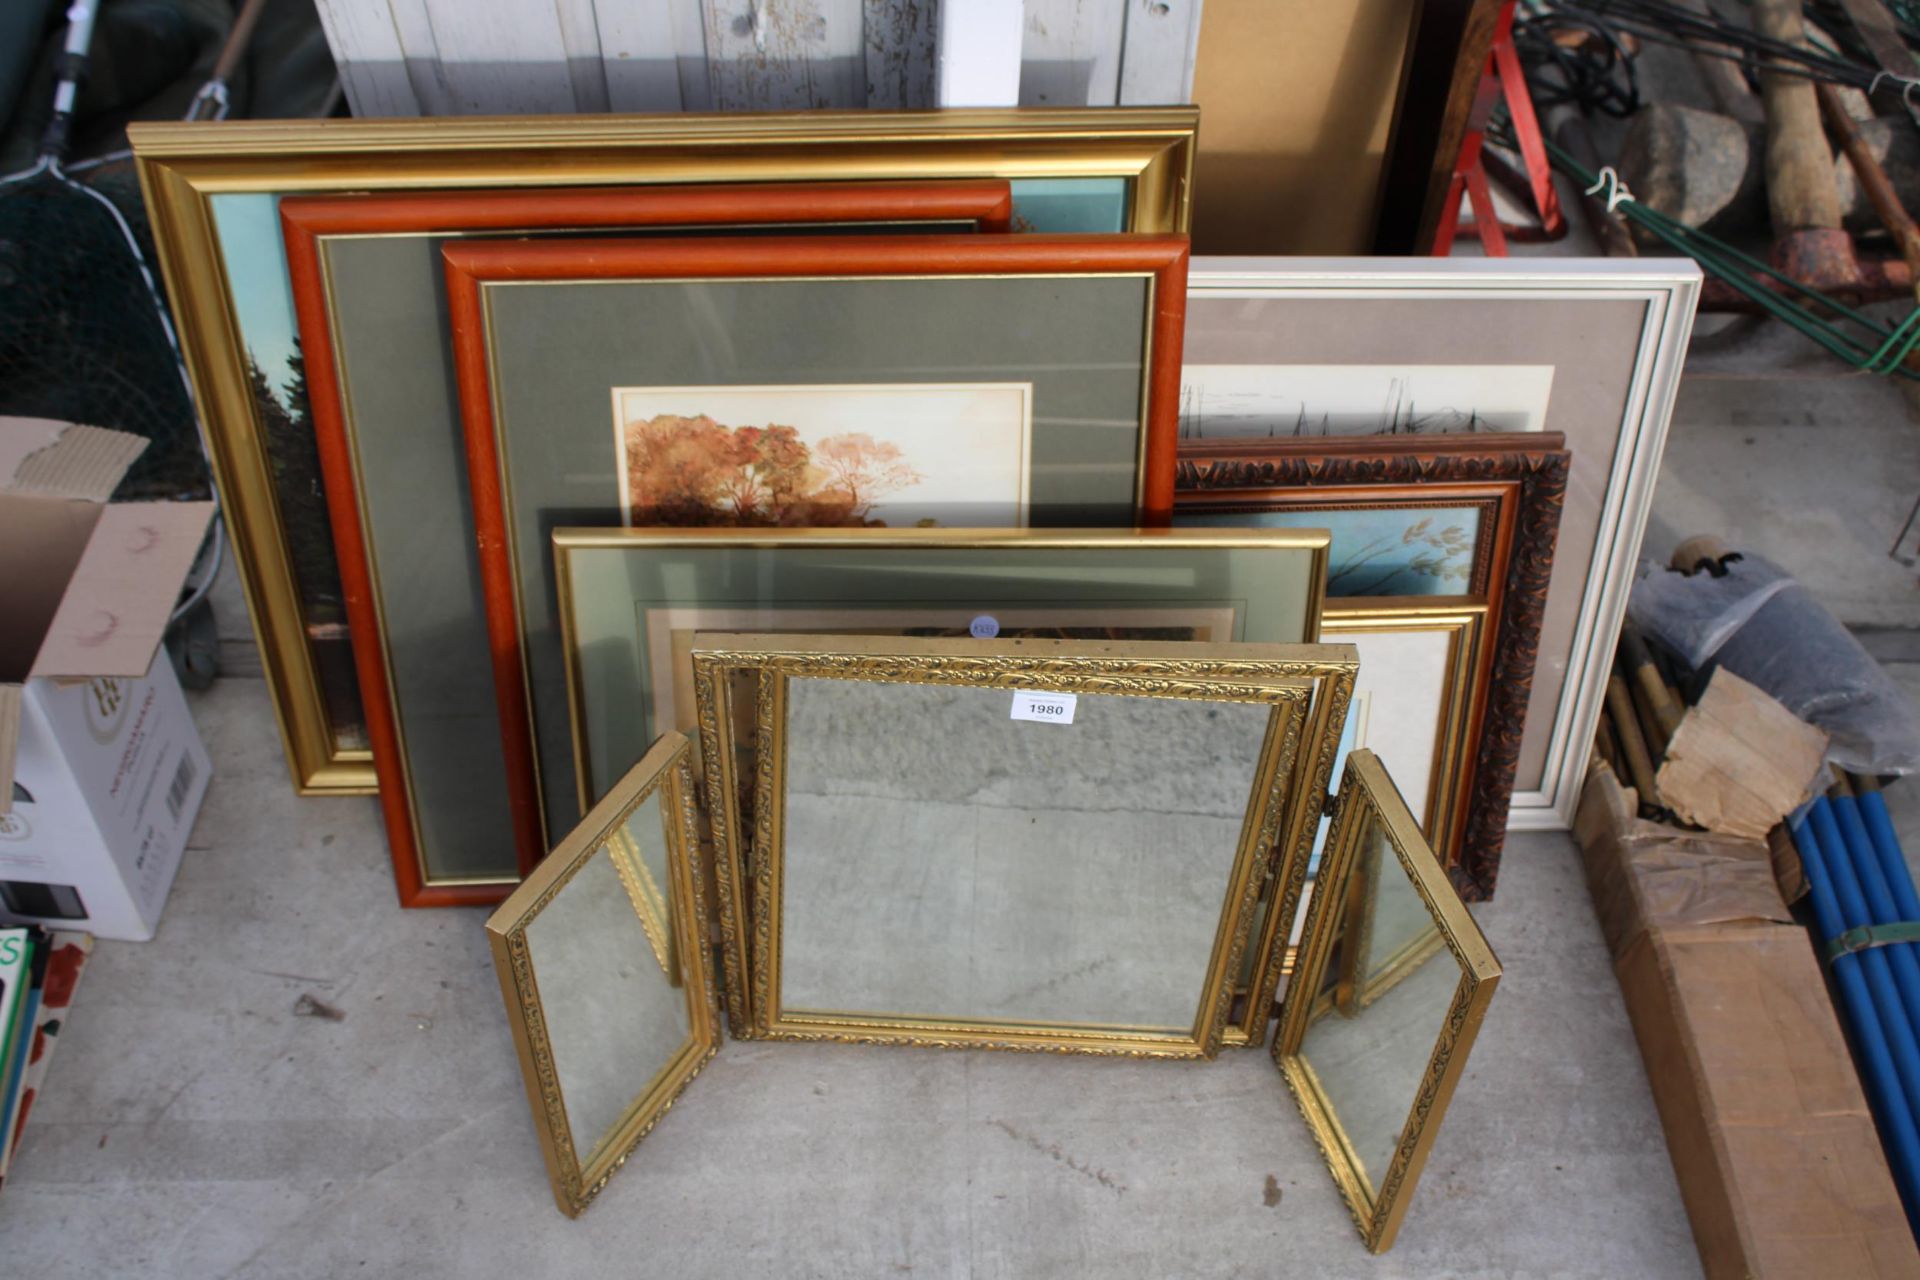 AN ASSORTMENT OF FRAMED PICTURES, PRINTS AND MIRRORS